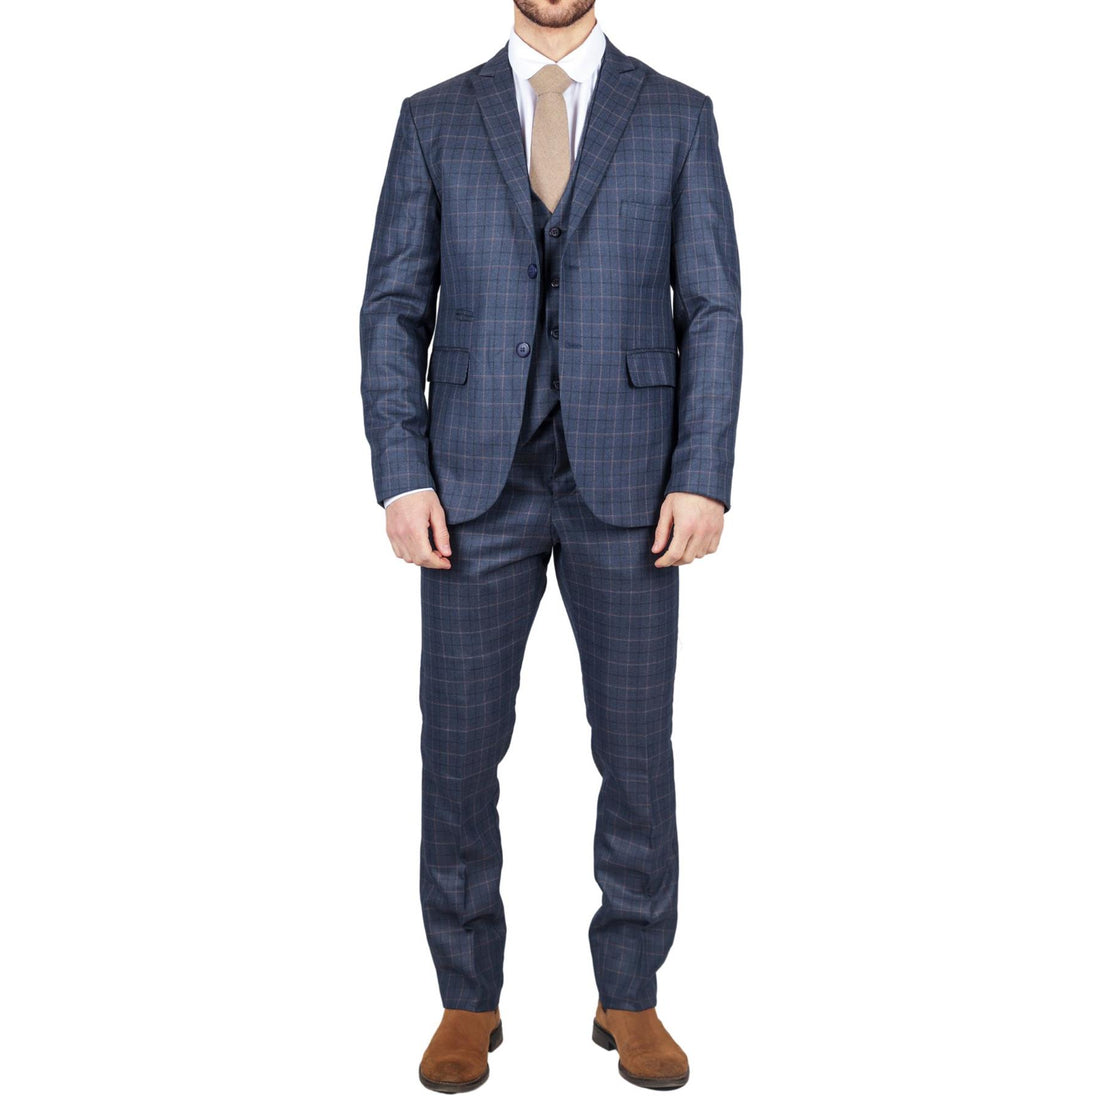 Men's Blue Suit Prince Of Wales Check Tailored Fit 3 Piece Formal Dress